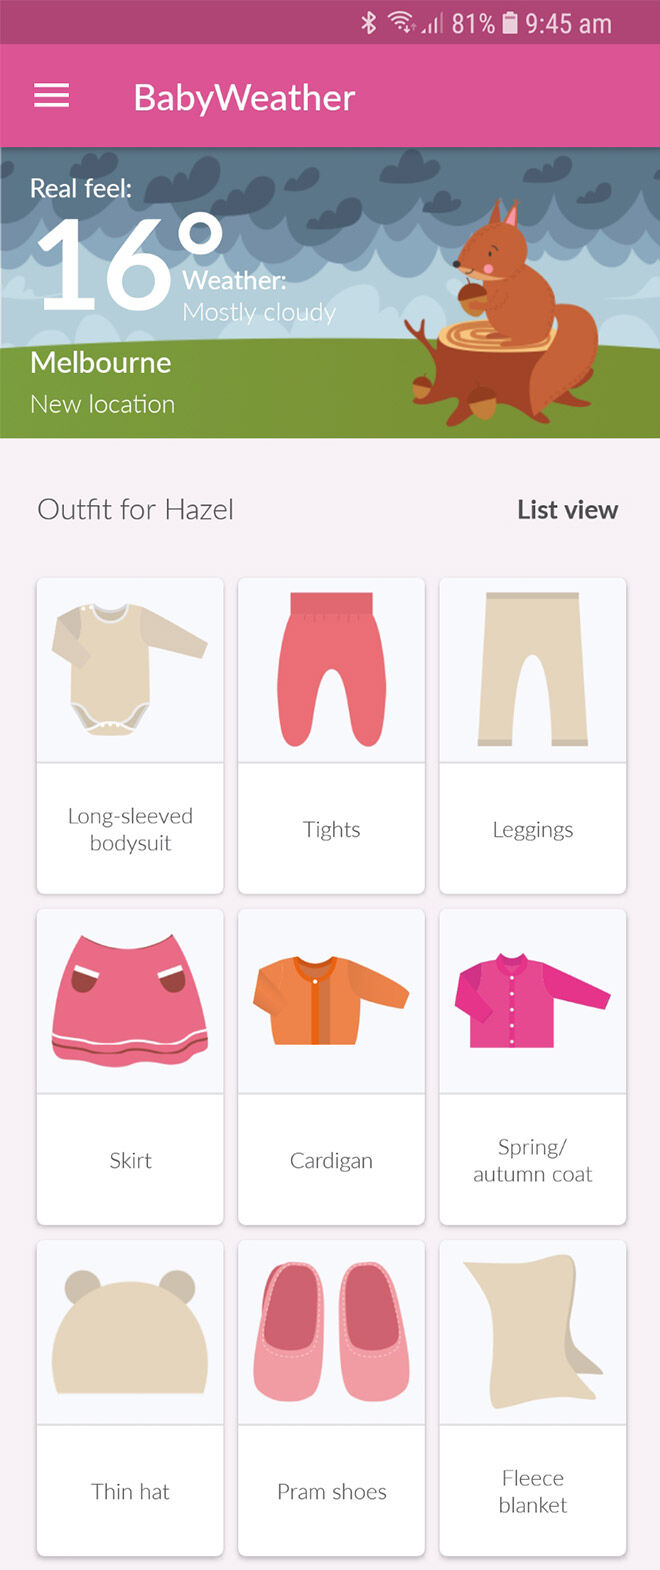 BabyWeather app outfit chooser